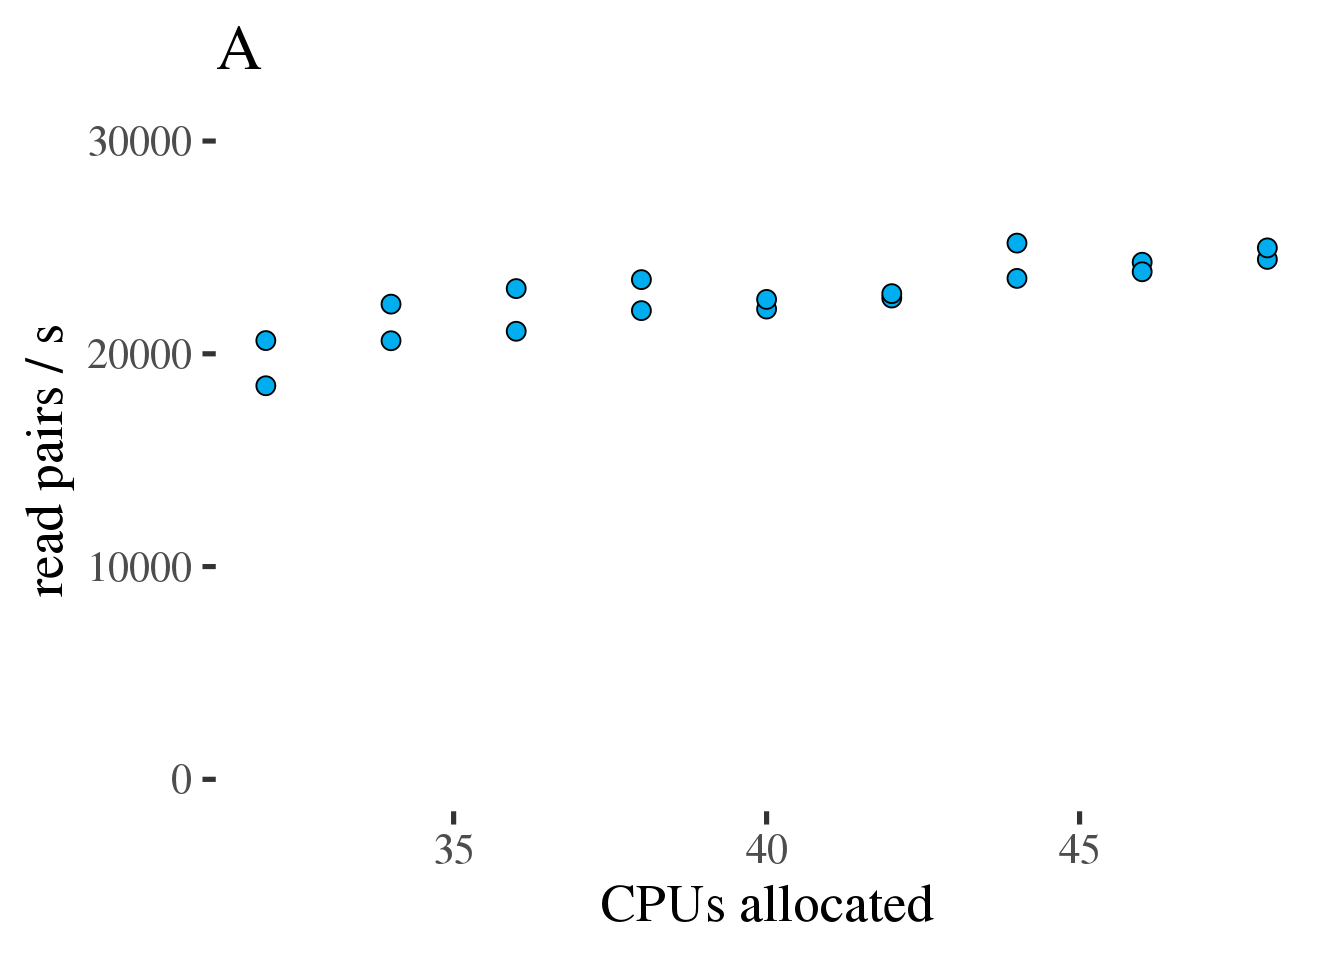 (A) Gross throughput in reads/s of the combined preprocessing pipeline from FASTQ to sorted alignments in a BAM file. The total thread count across all three tools. (B) Like the plot on the left but showing Reads/s/cpu, a measure of efficiency.